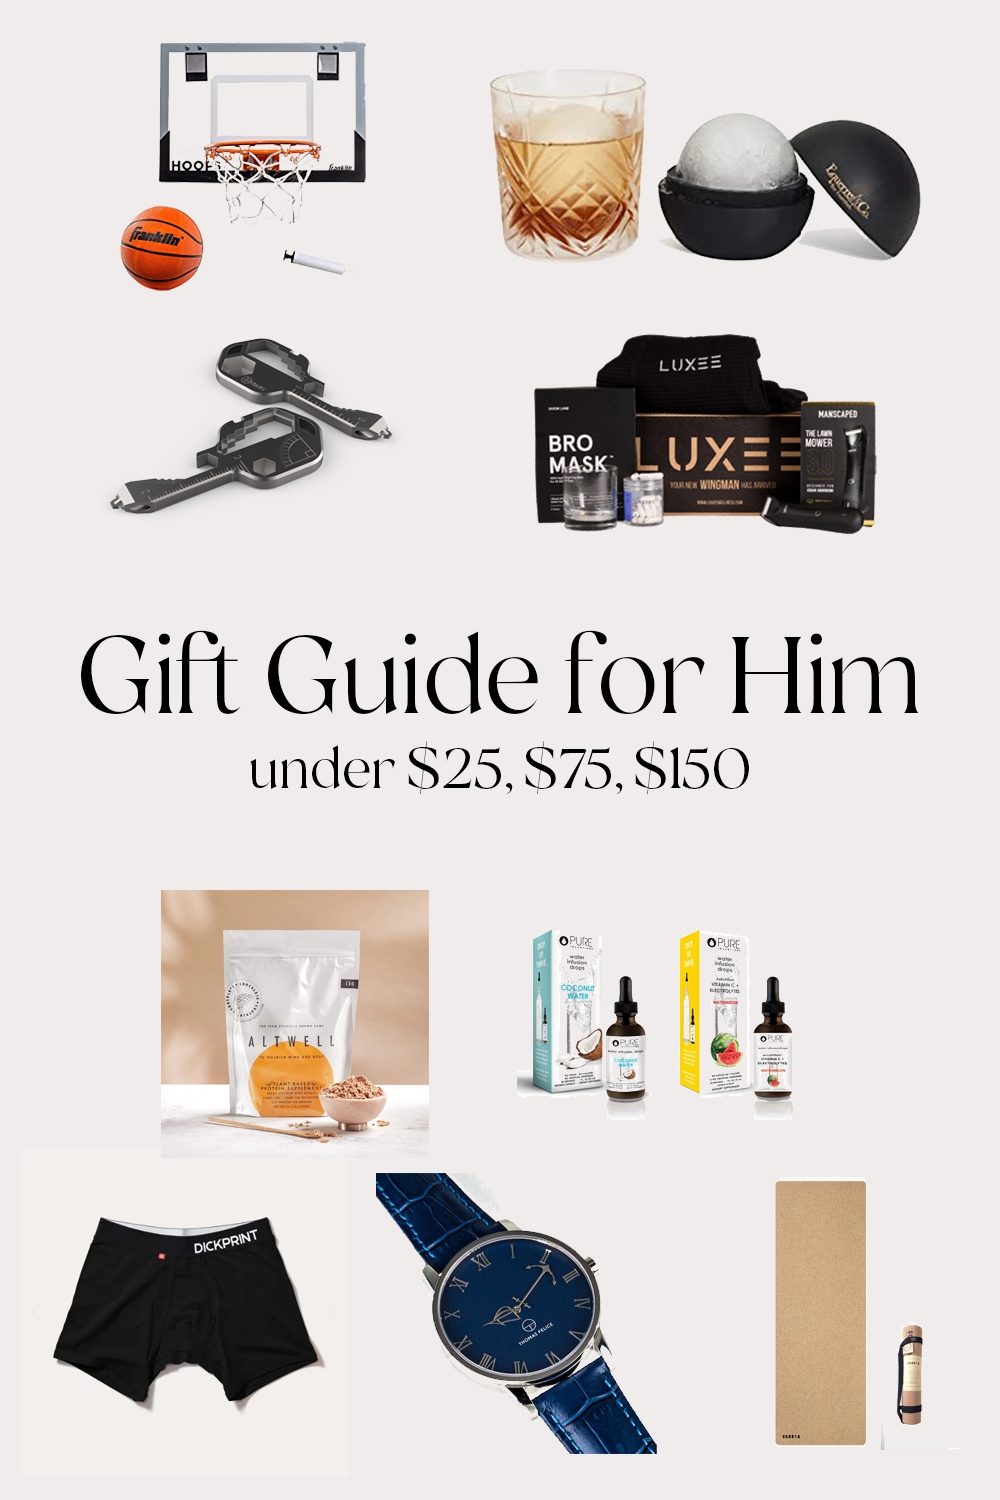 Holiday Gift Guide for Him 2020 Under $50, $75, $150